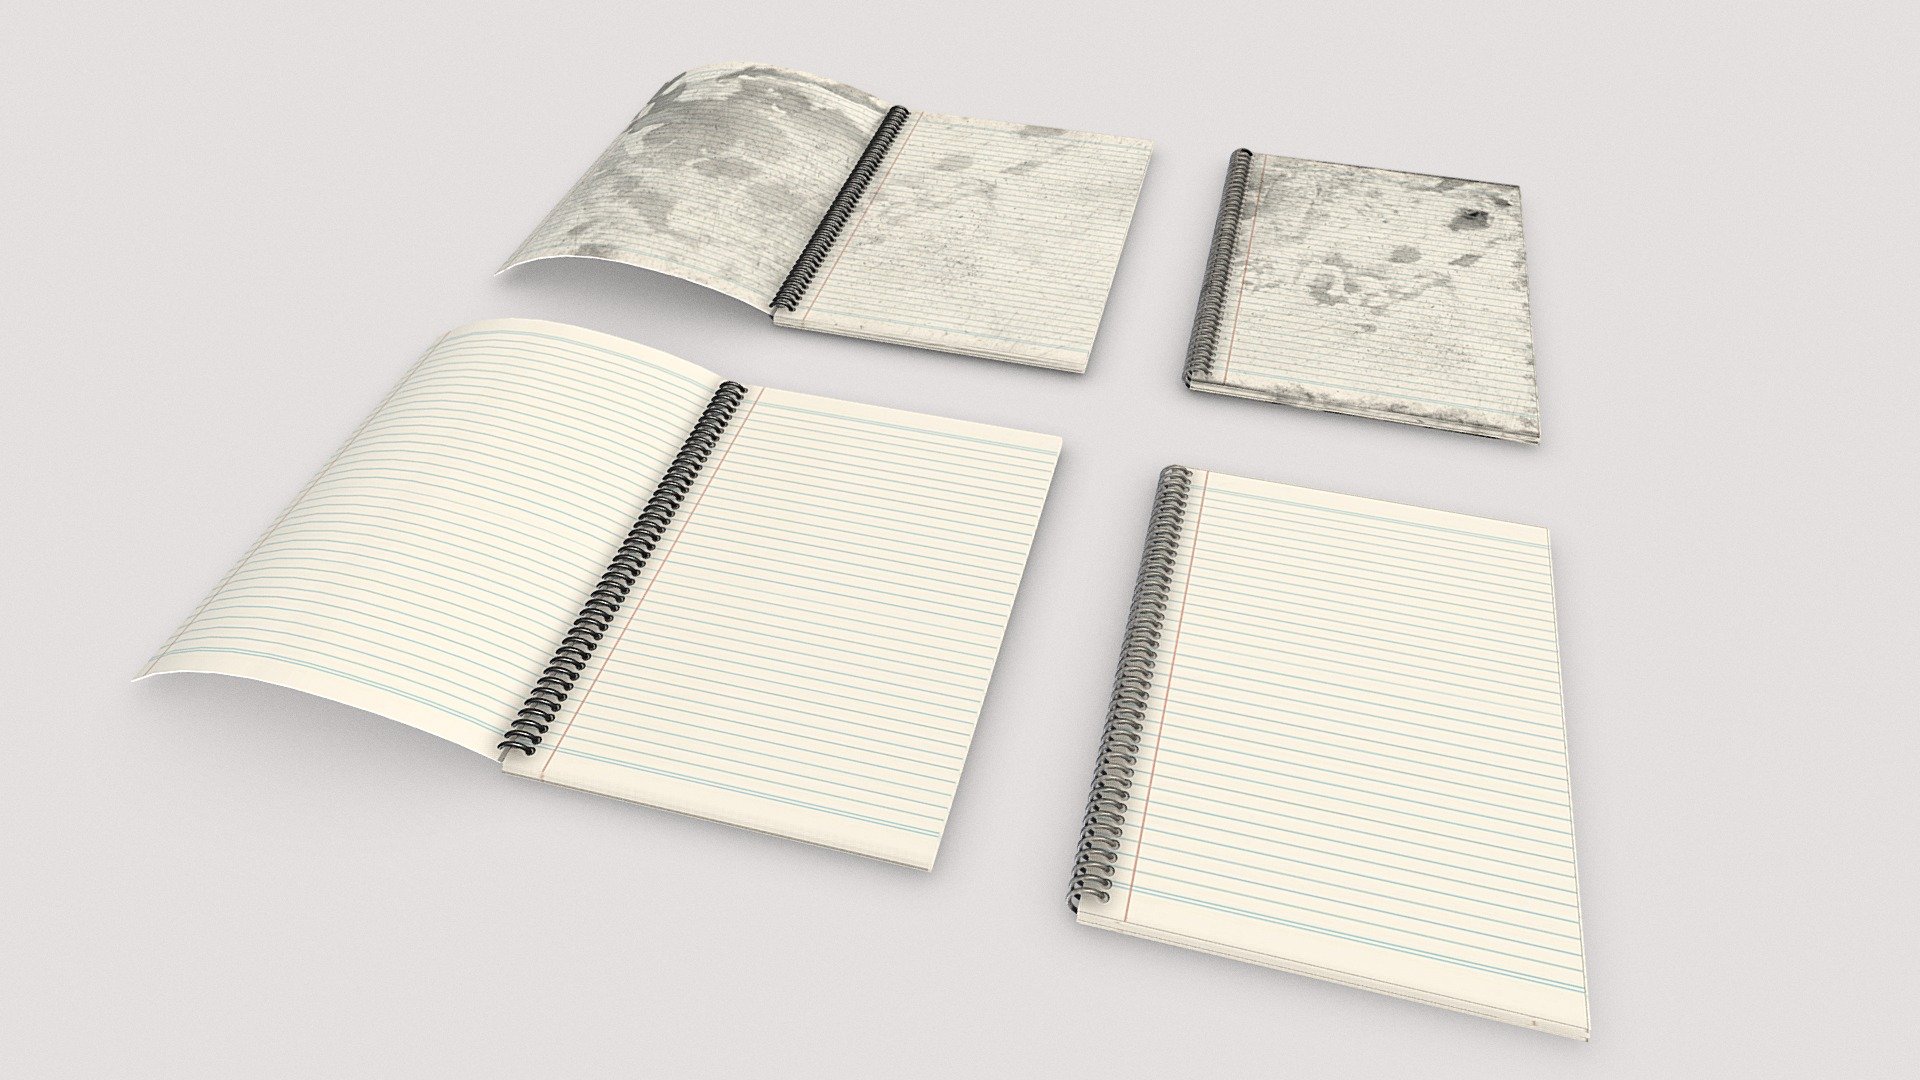 A collection of spiral notepads, different versions are suitable for different environments. 

2 open books with dirt
2 closed books that are clean

PBR textures @2k - Spiral notepads - Buy Royalty Free 3D model by Sousinho 3d model